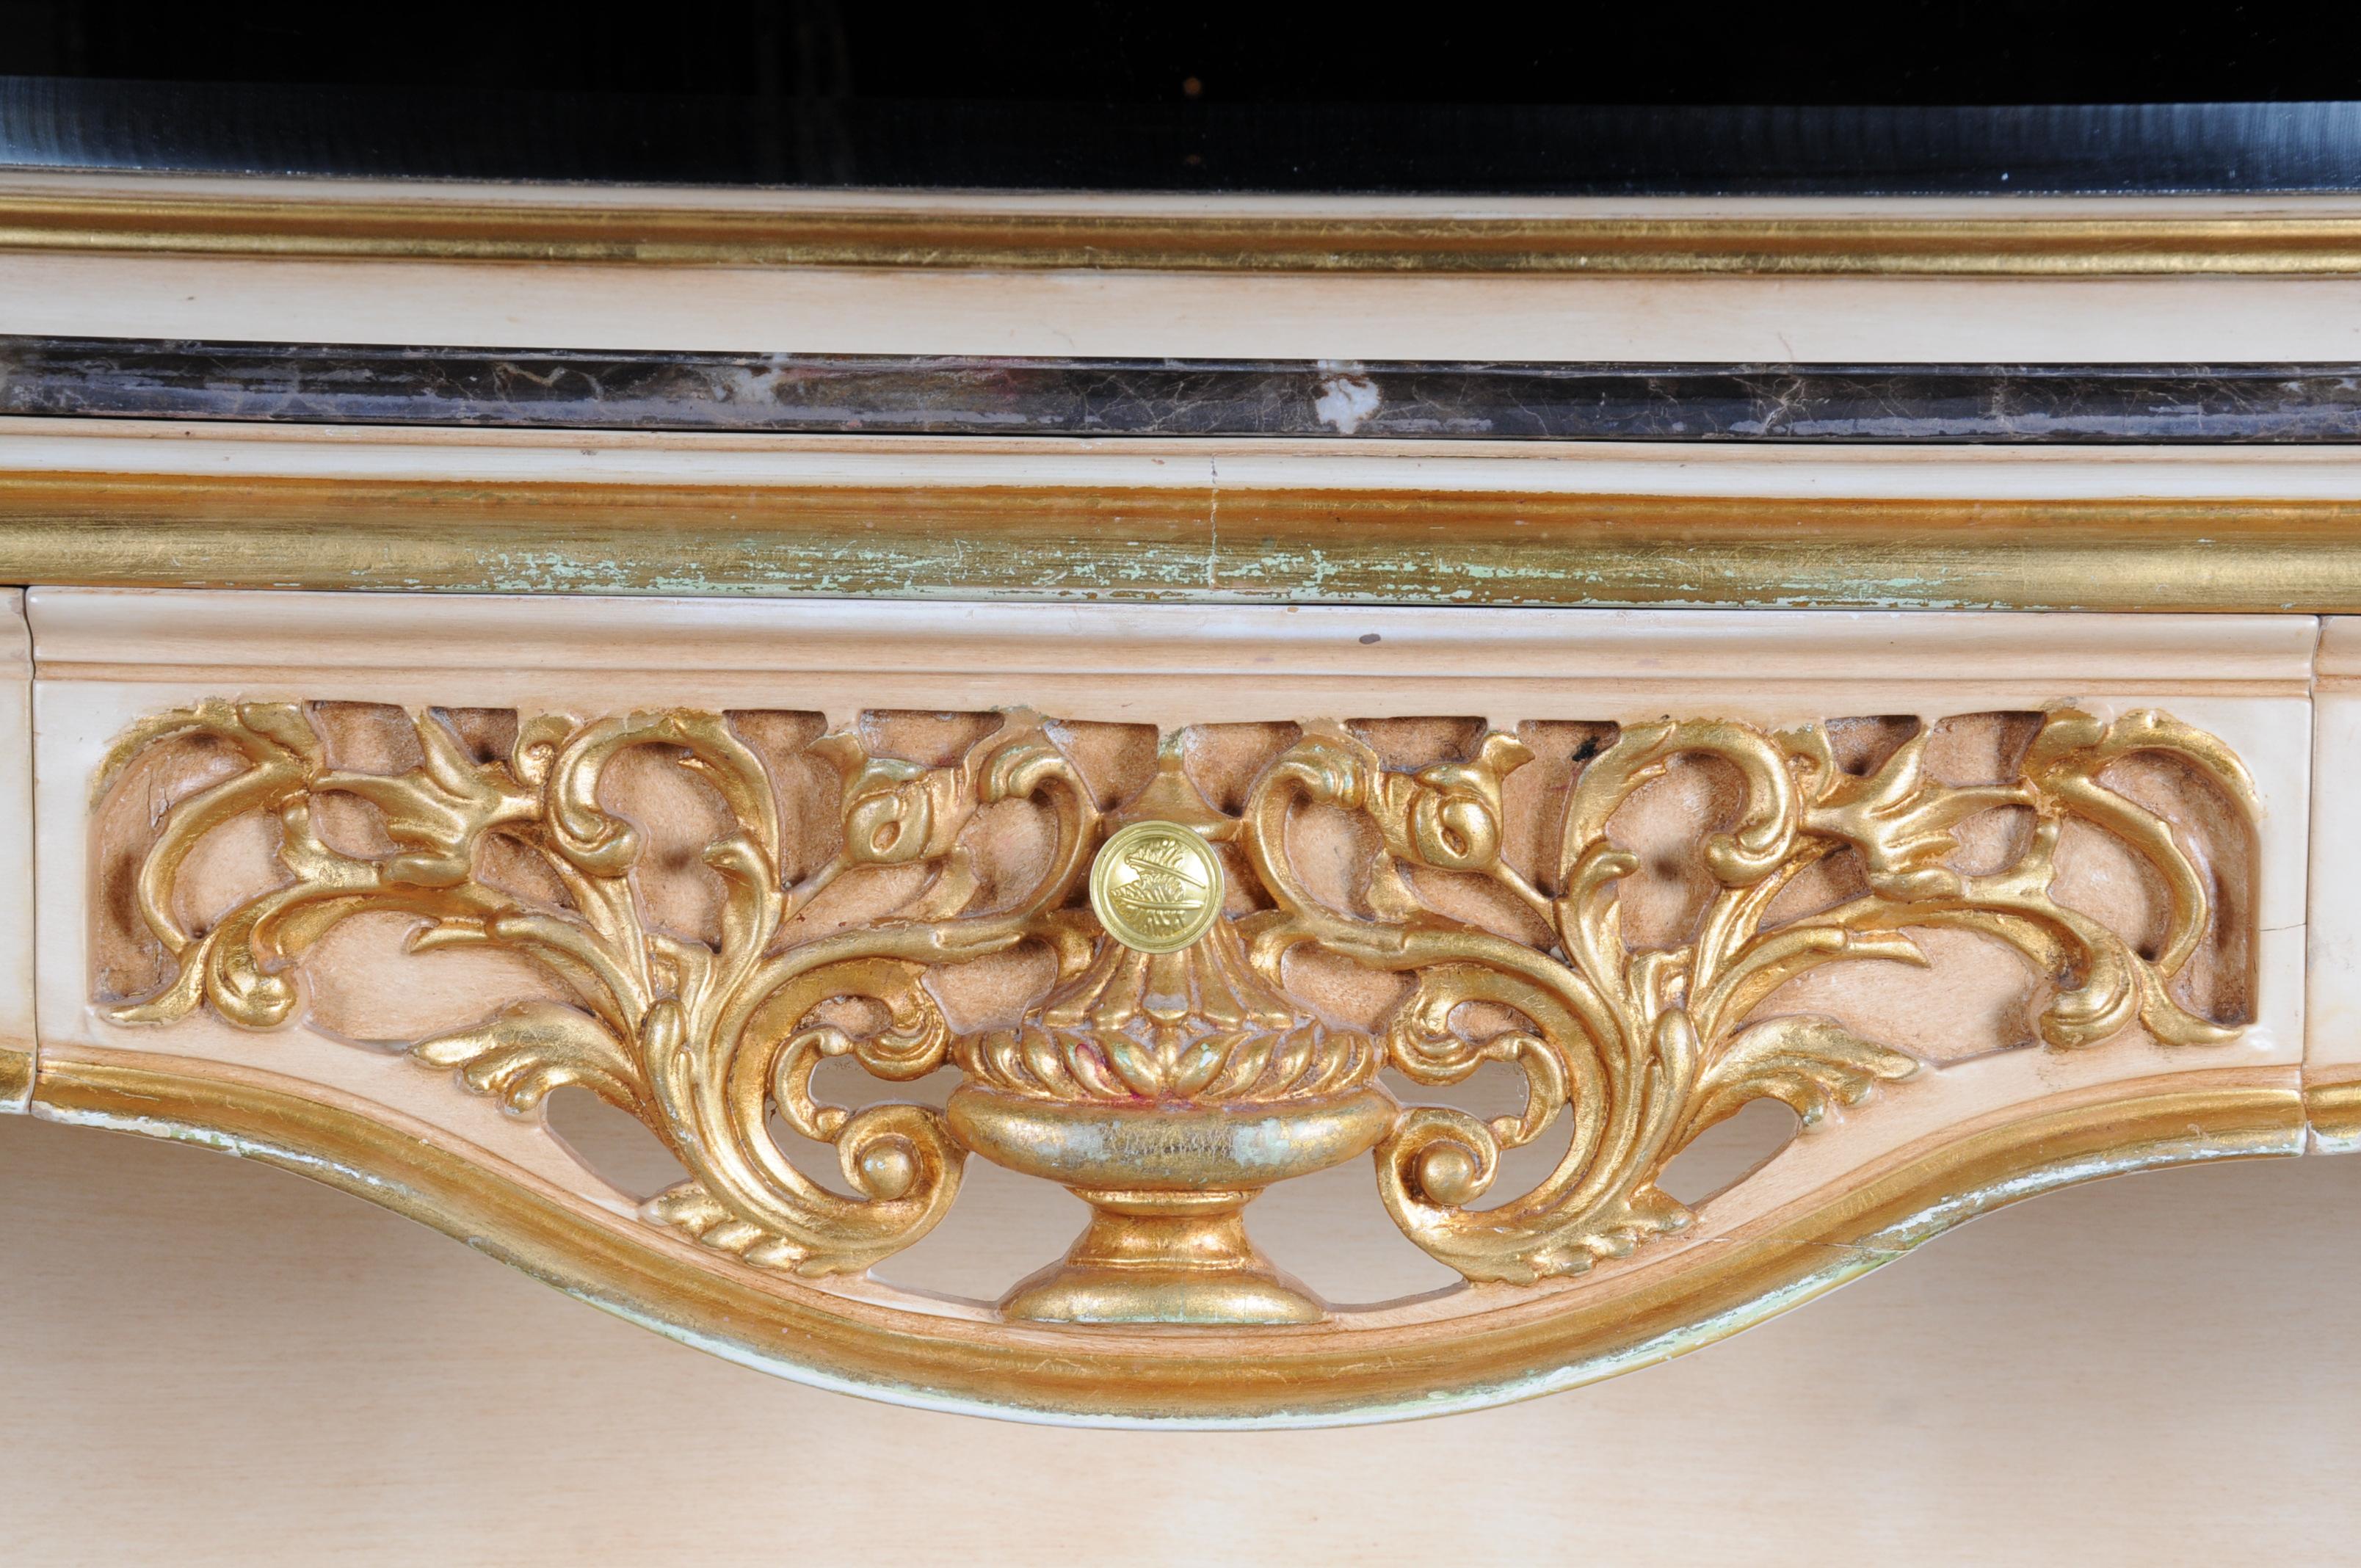 Hand-Carved Magnificent Sideboard / Dresser / Dressing Table Baroque, 20th Century For Sale